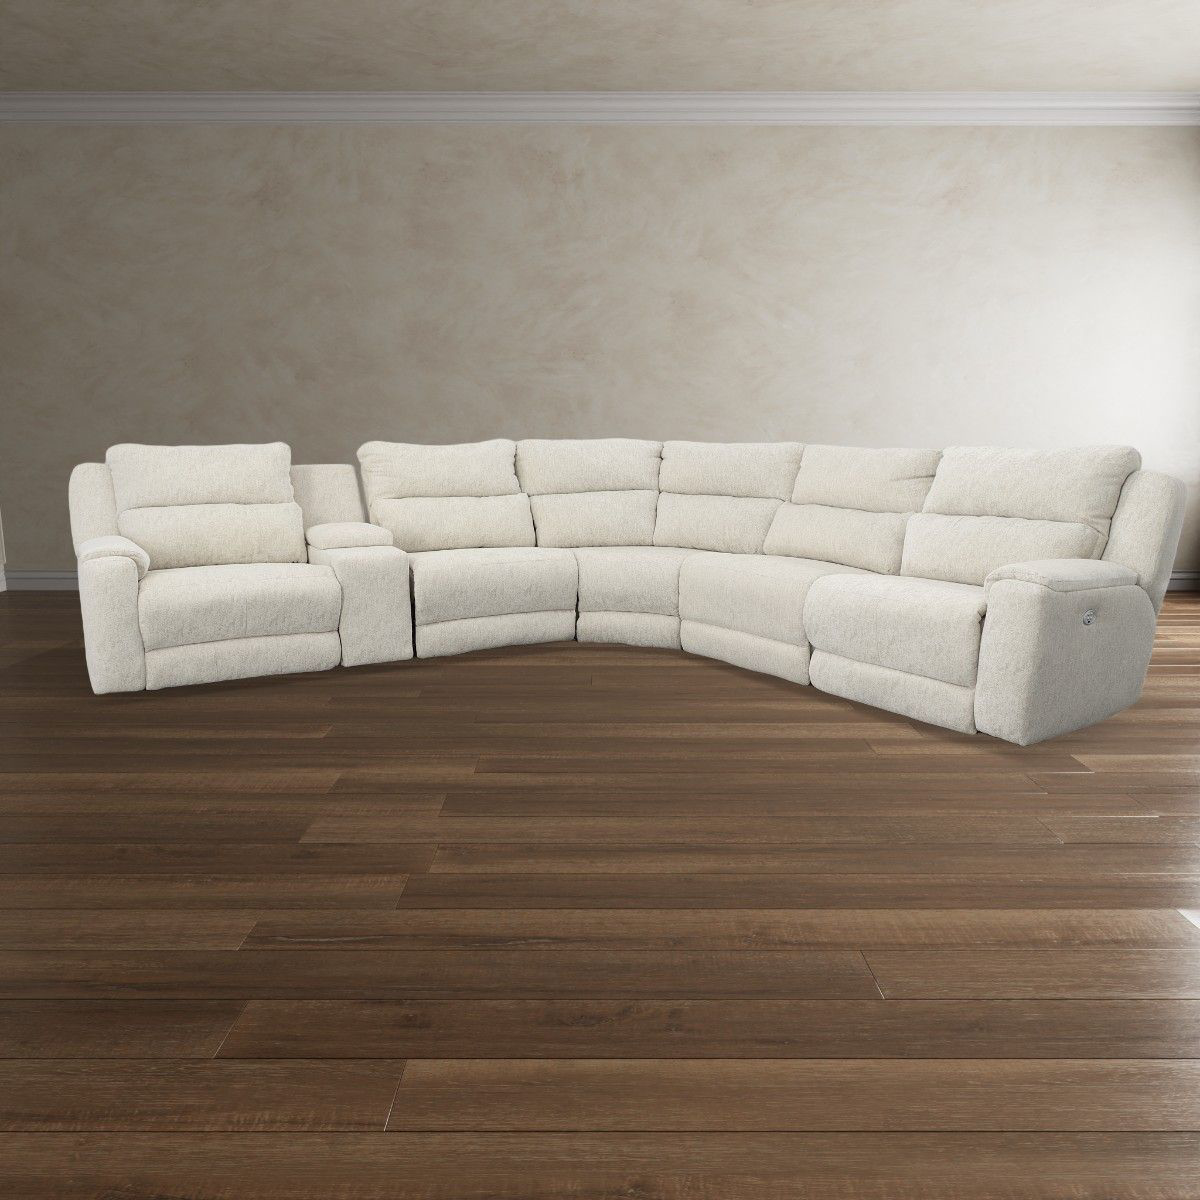 6 Piece Power Leather Sectional Sofa